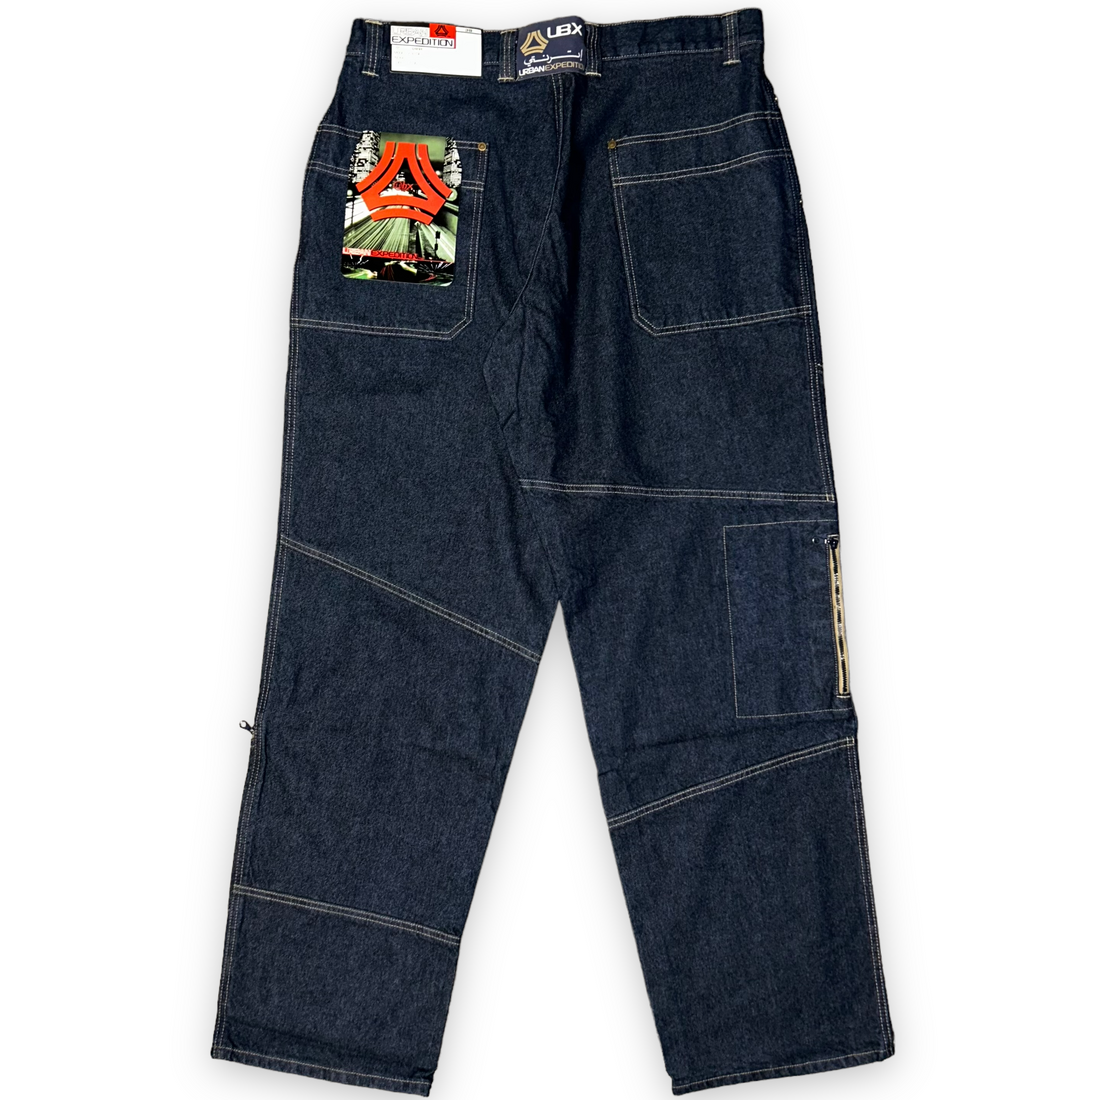 Urban Expedition UBX vintage baggy jeans